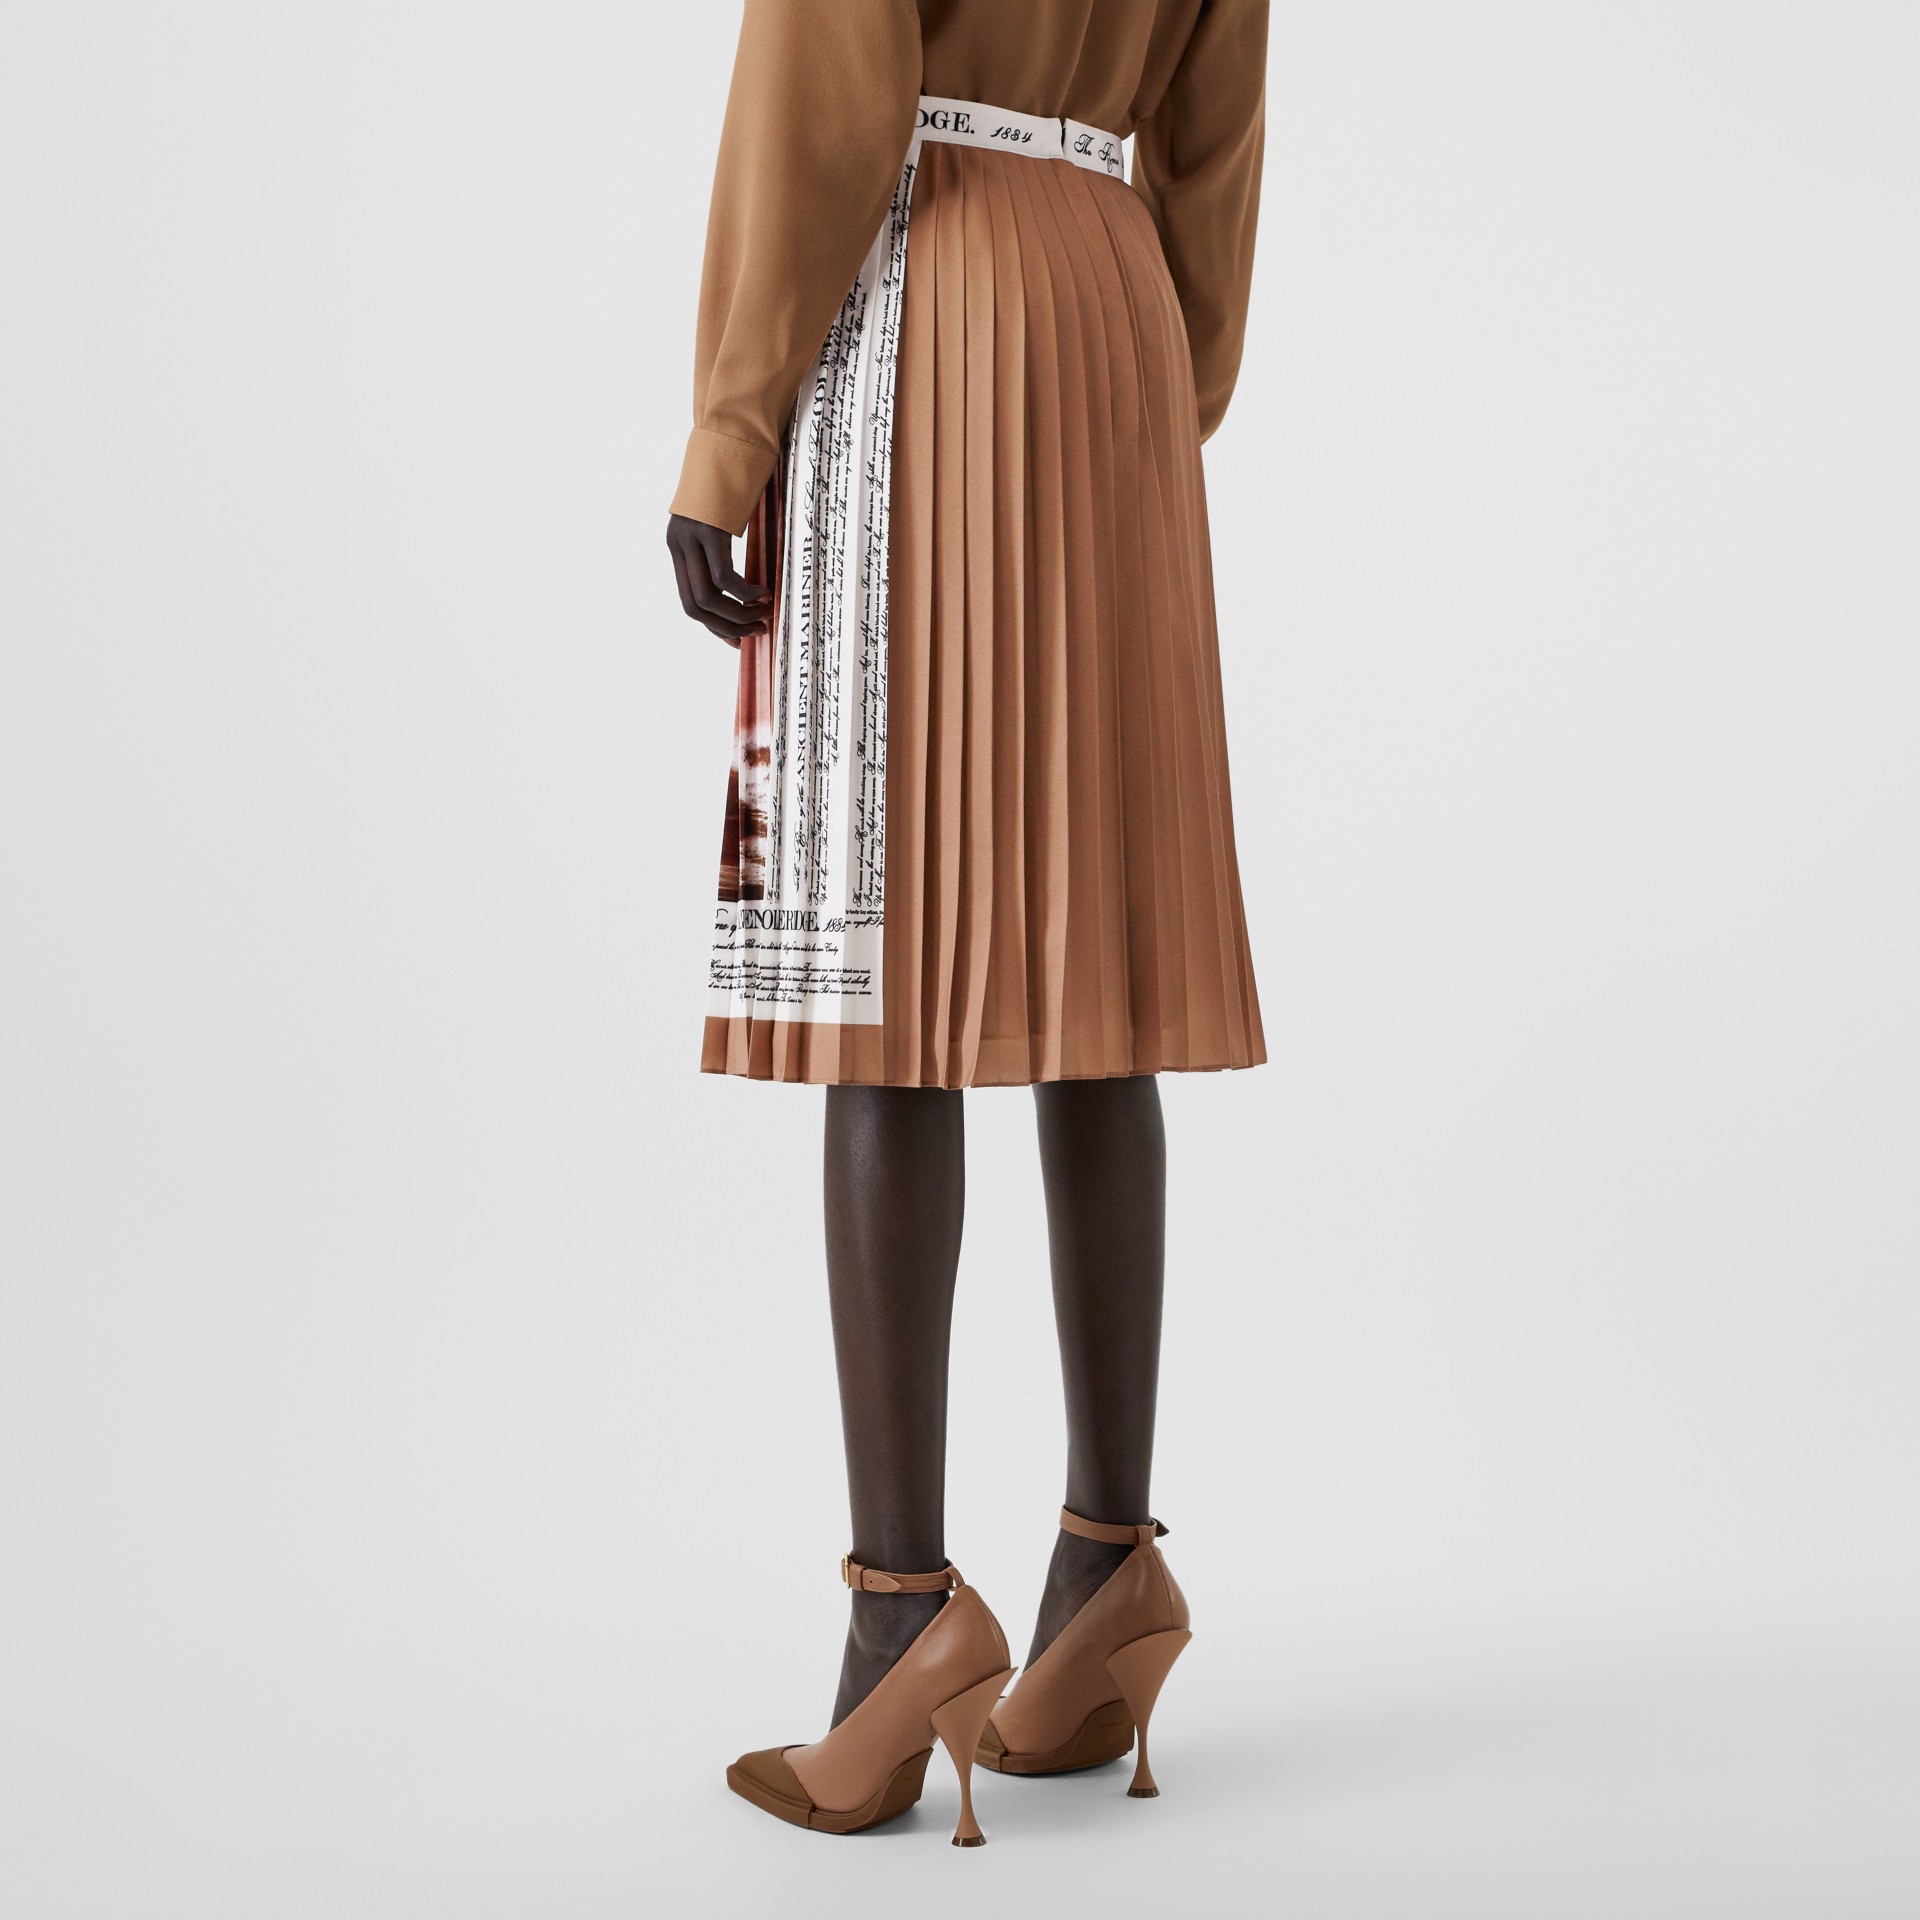 Mariner Print Pleated Cady Skirt in Bronze - Women | Burberry United States